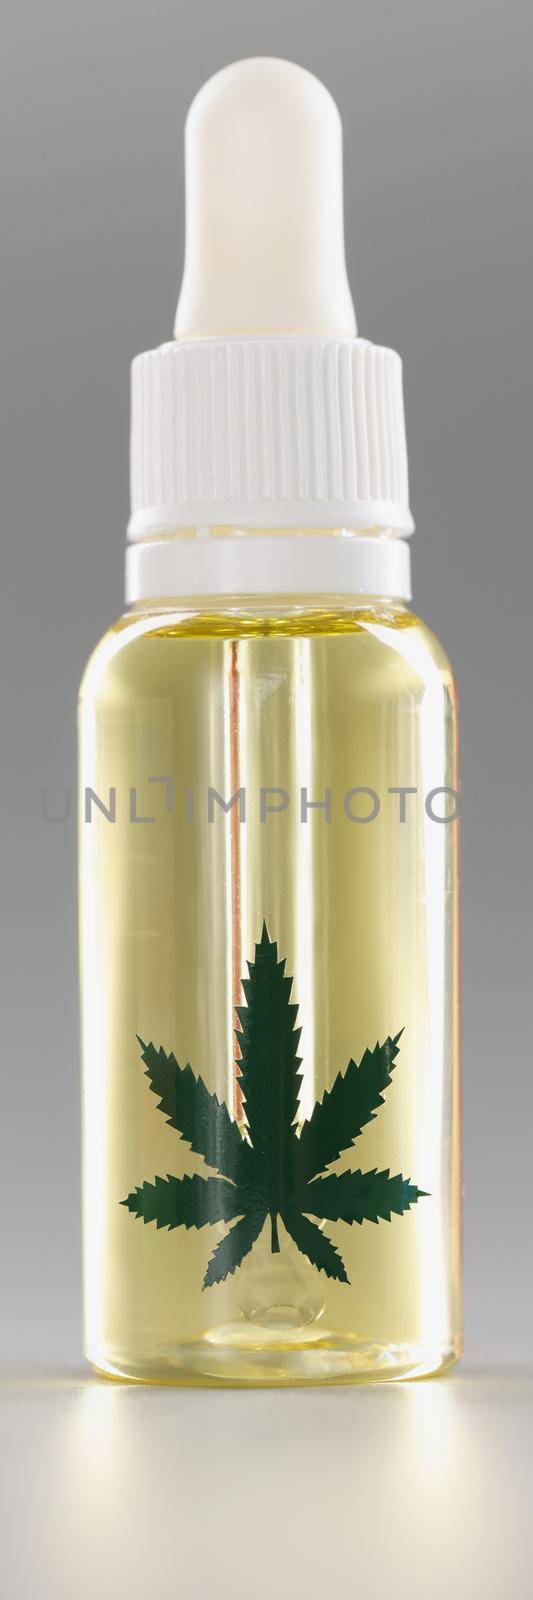 Close-up of bottle with liquid cannabis oil, healthy hemp plant for face or medication treatment. Cosmetology, hashish, cbd, alternative medicine concept